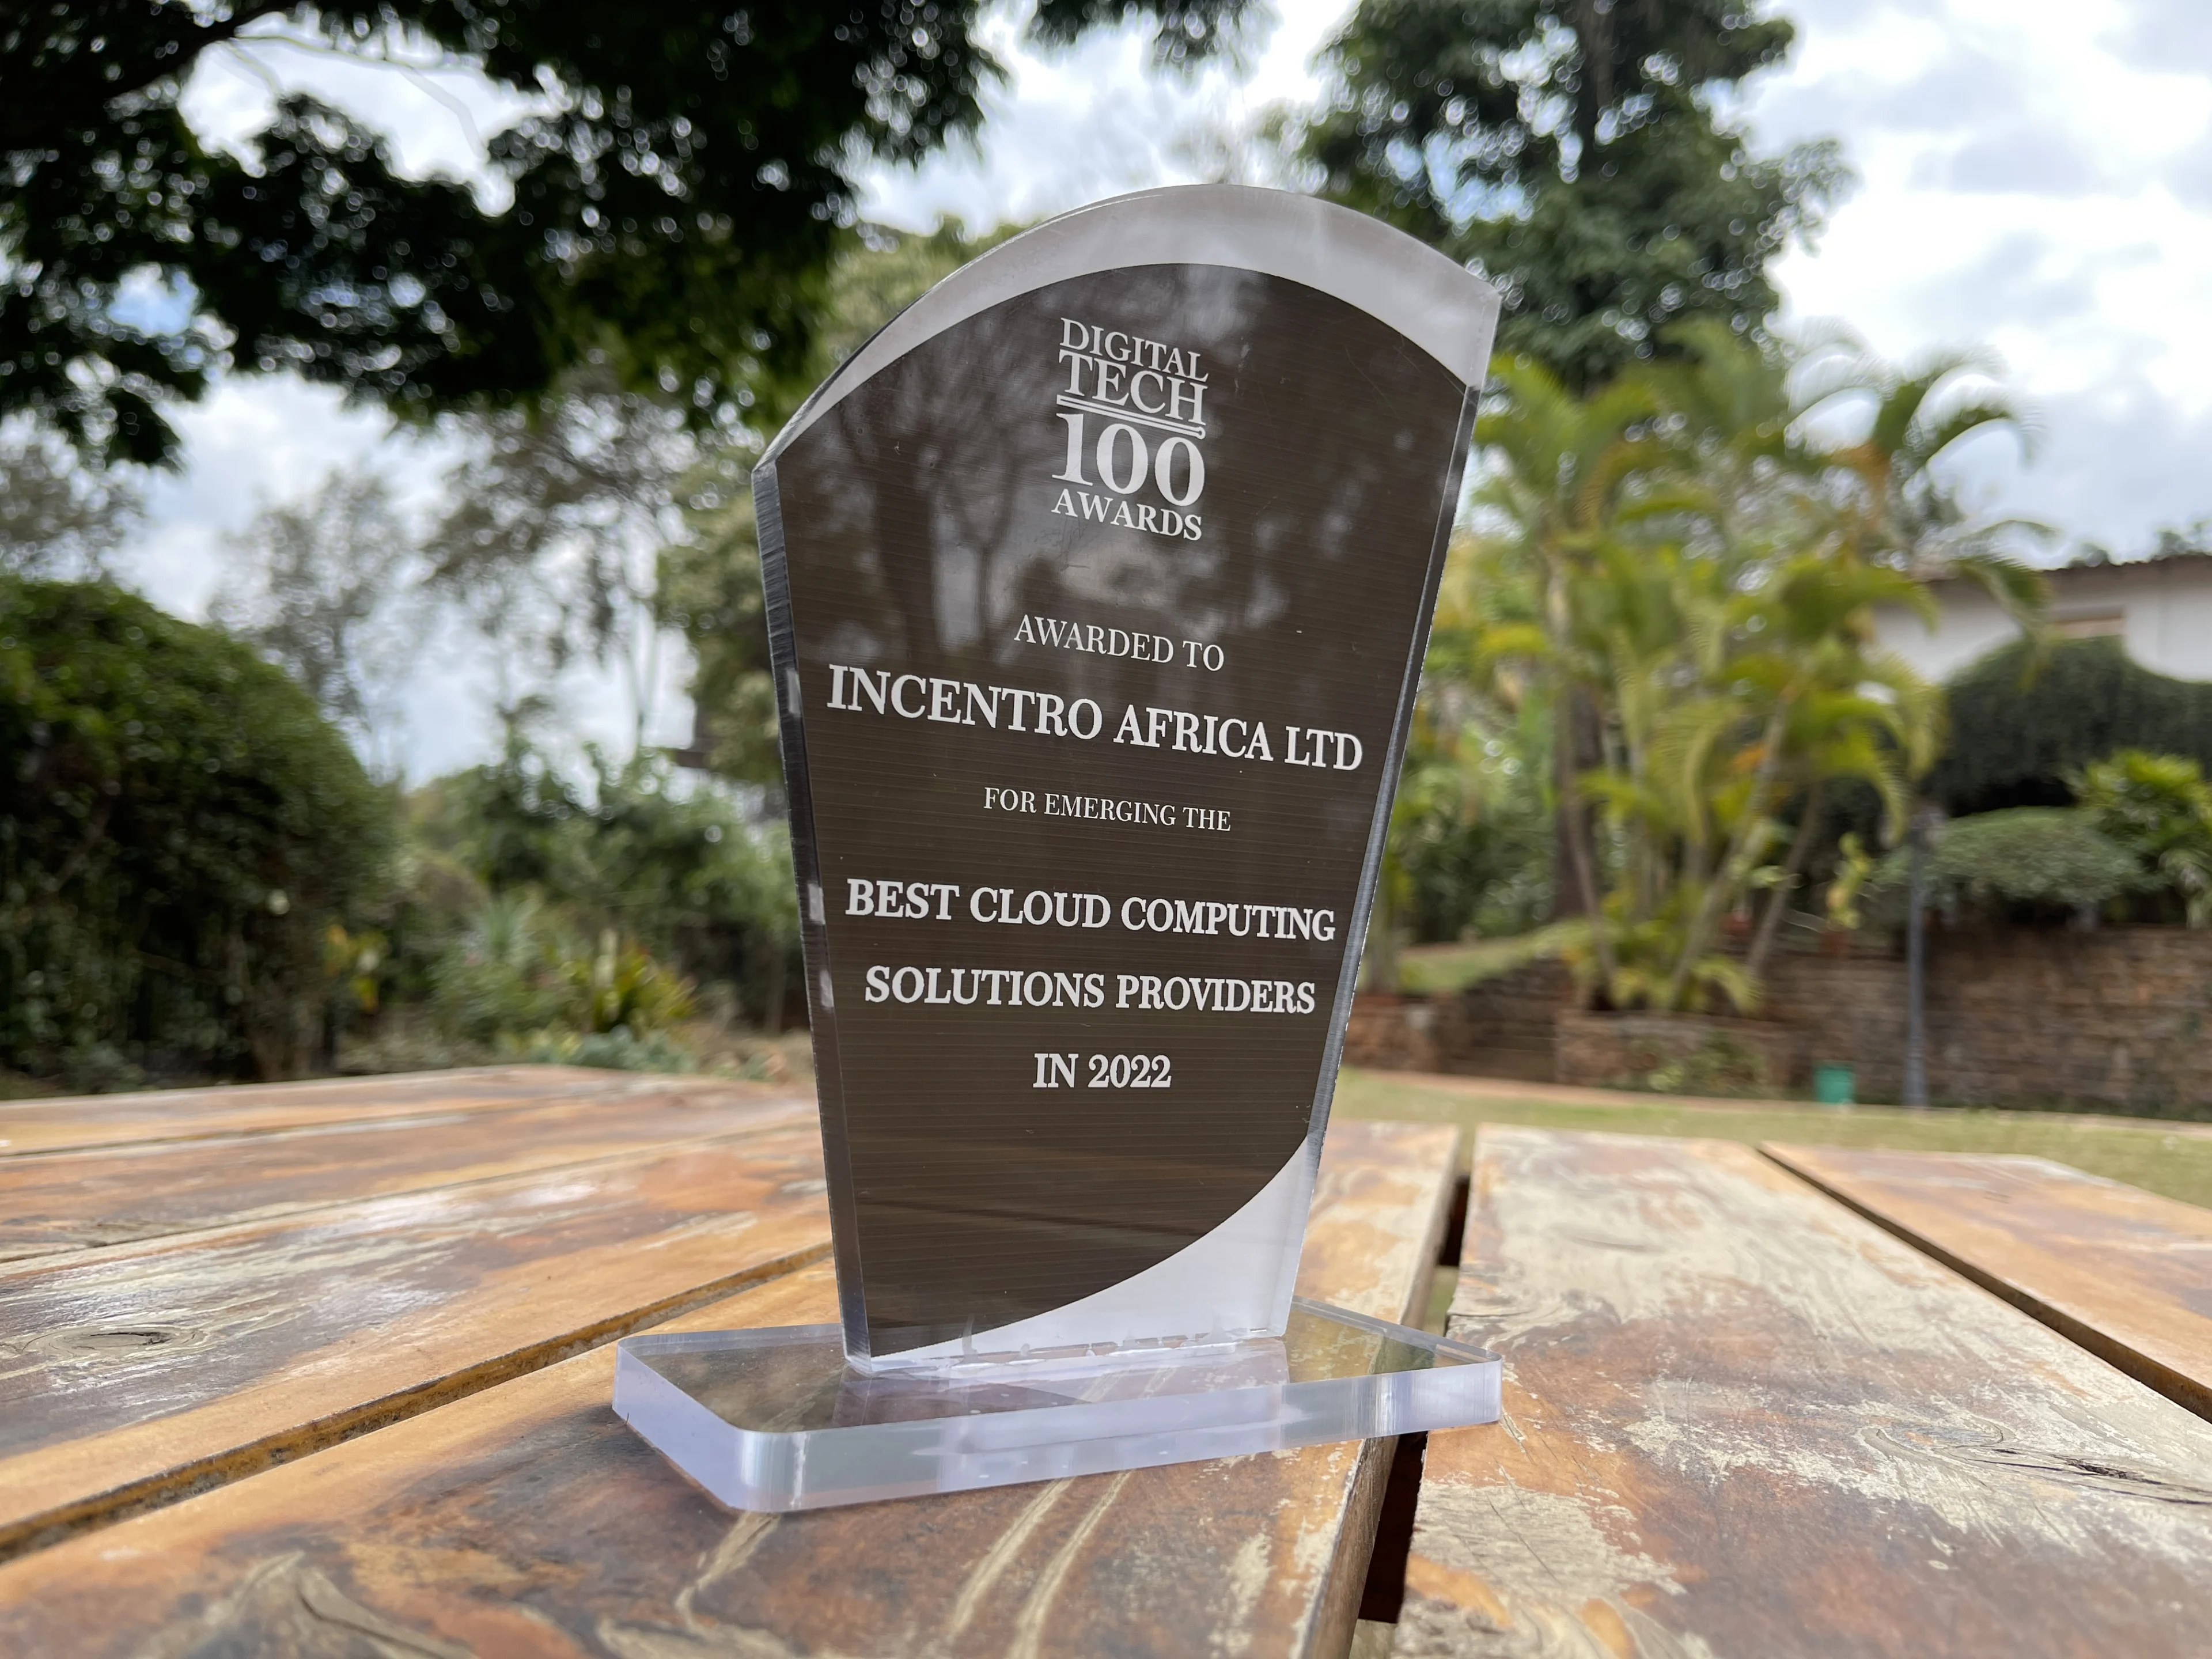 Incentro Africa Awarded Best Cloud Computing Solutions Provider, 2022.